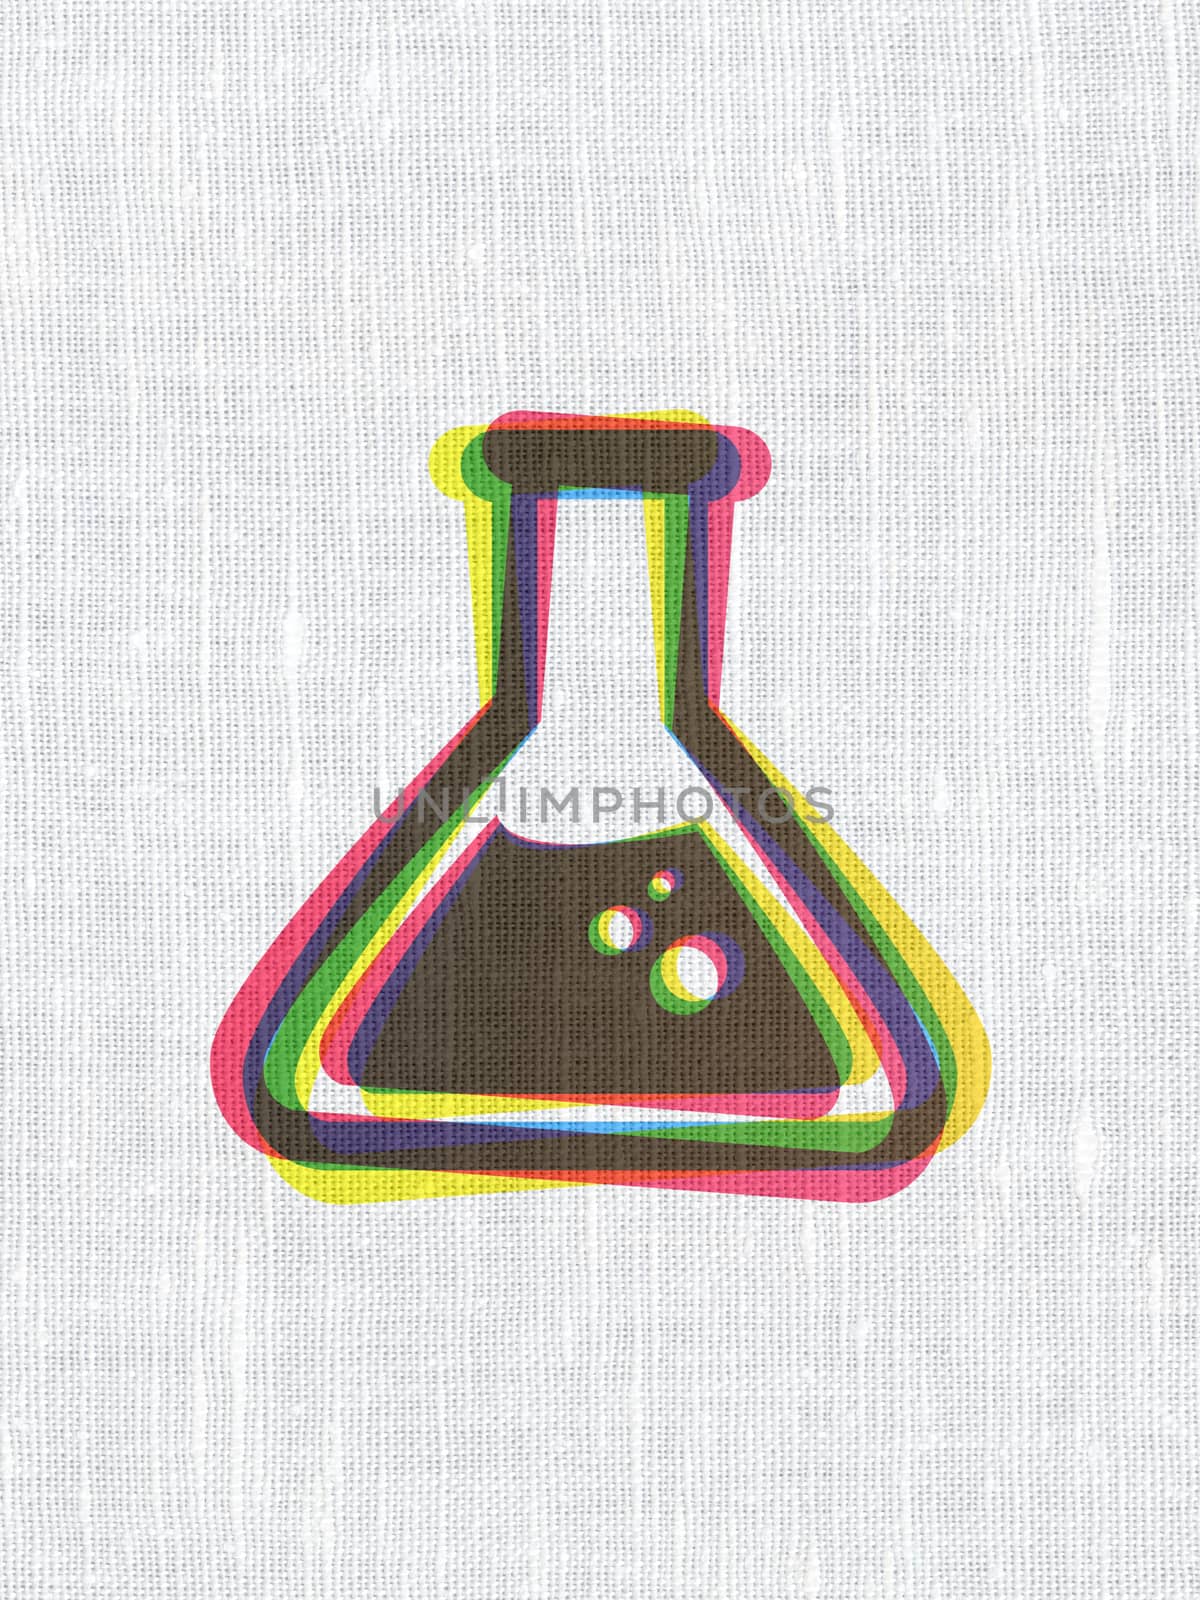 Science concept: CMYK Flask on linen fabric texture background